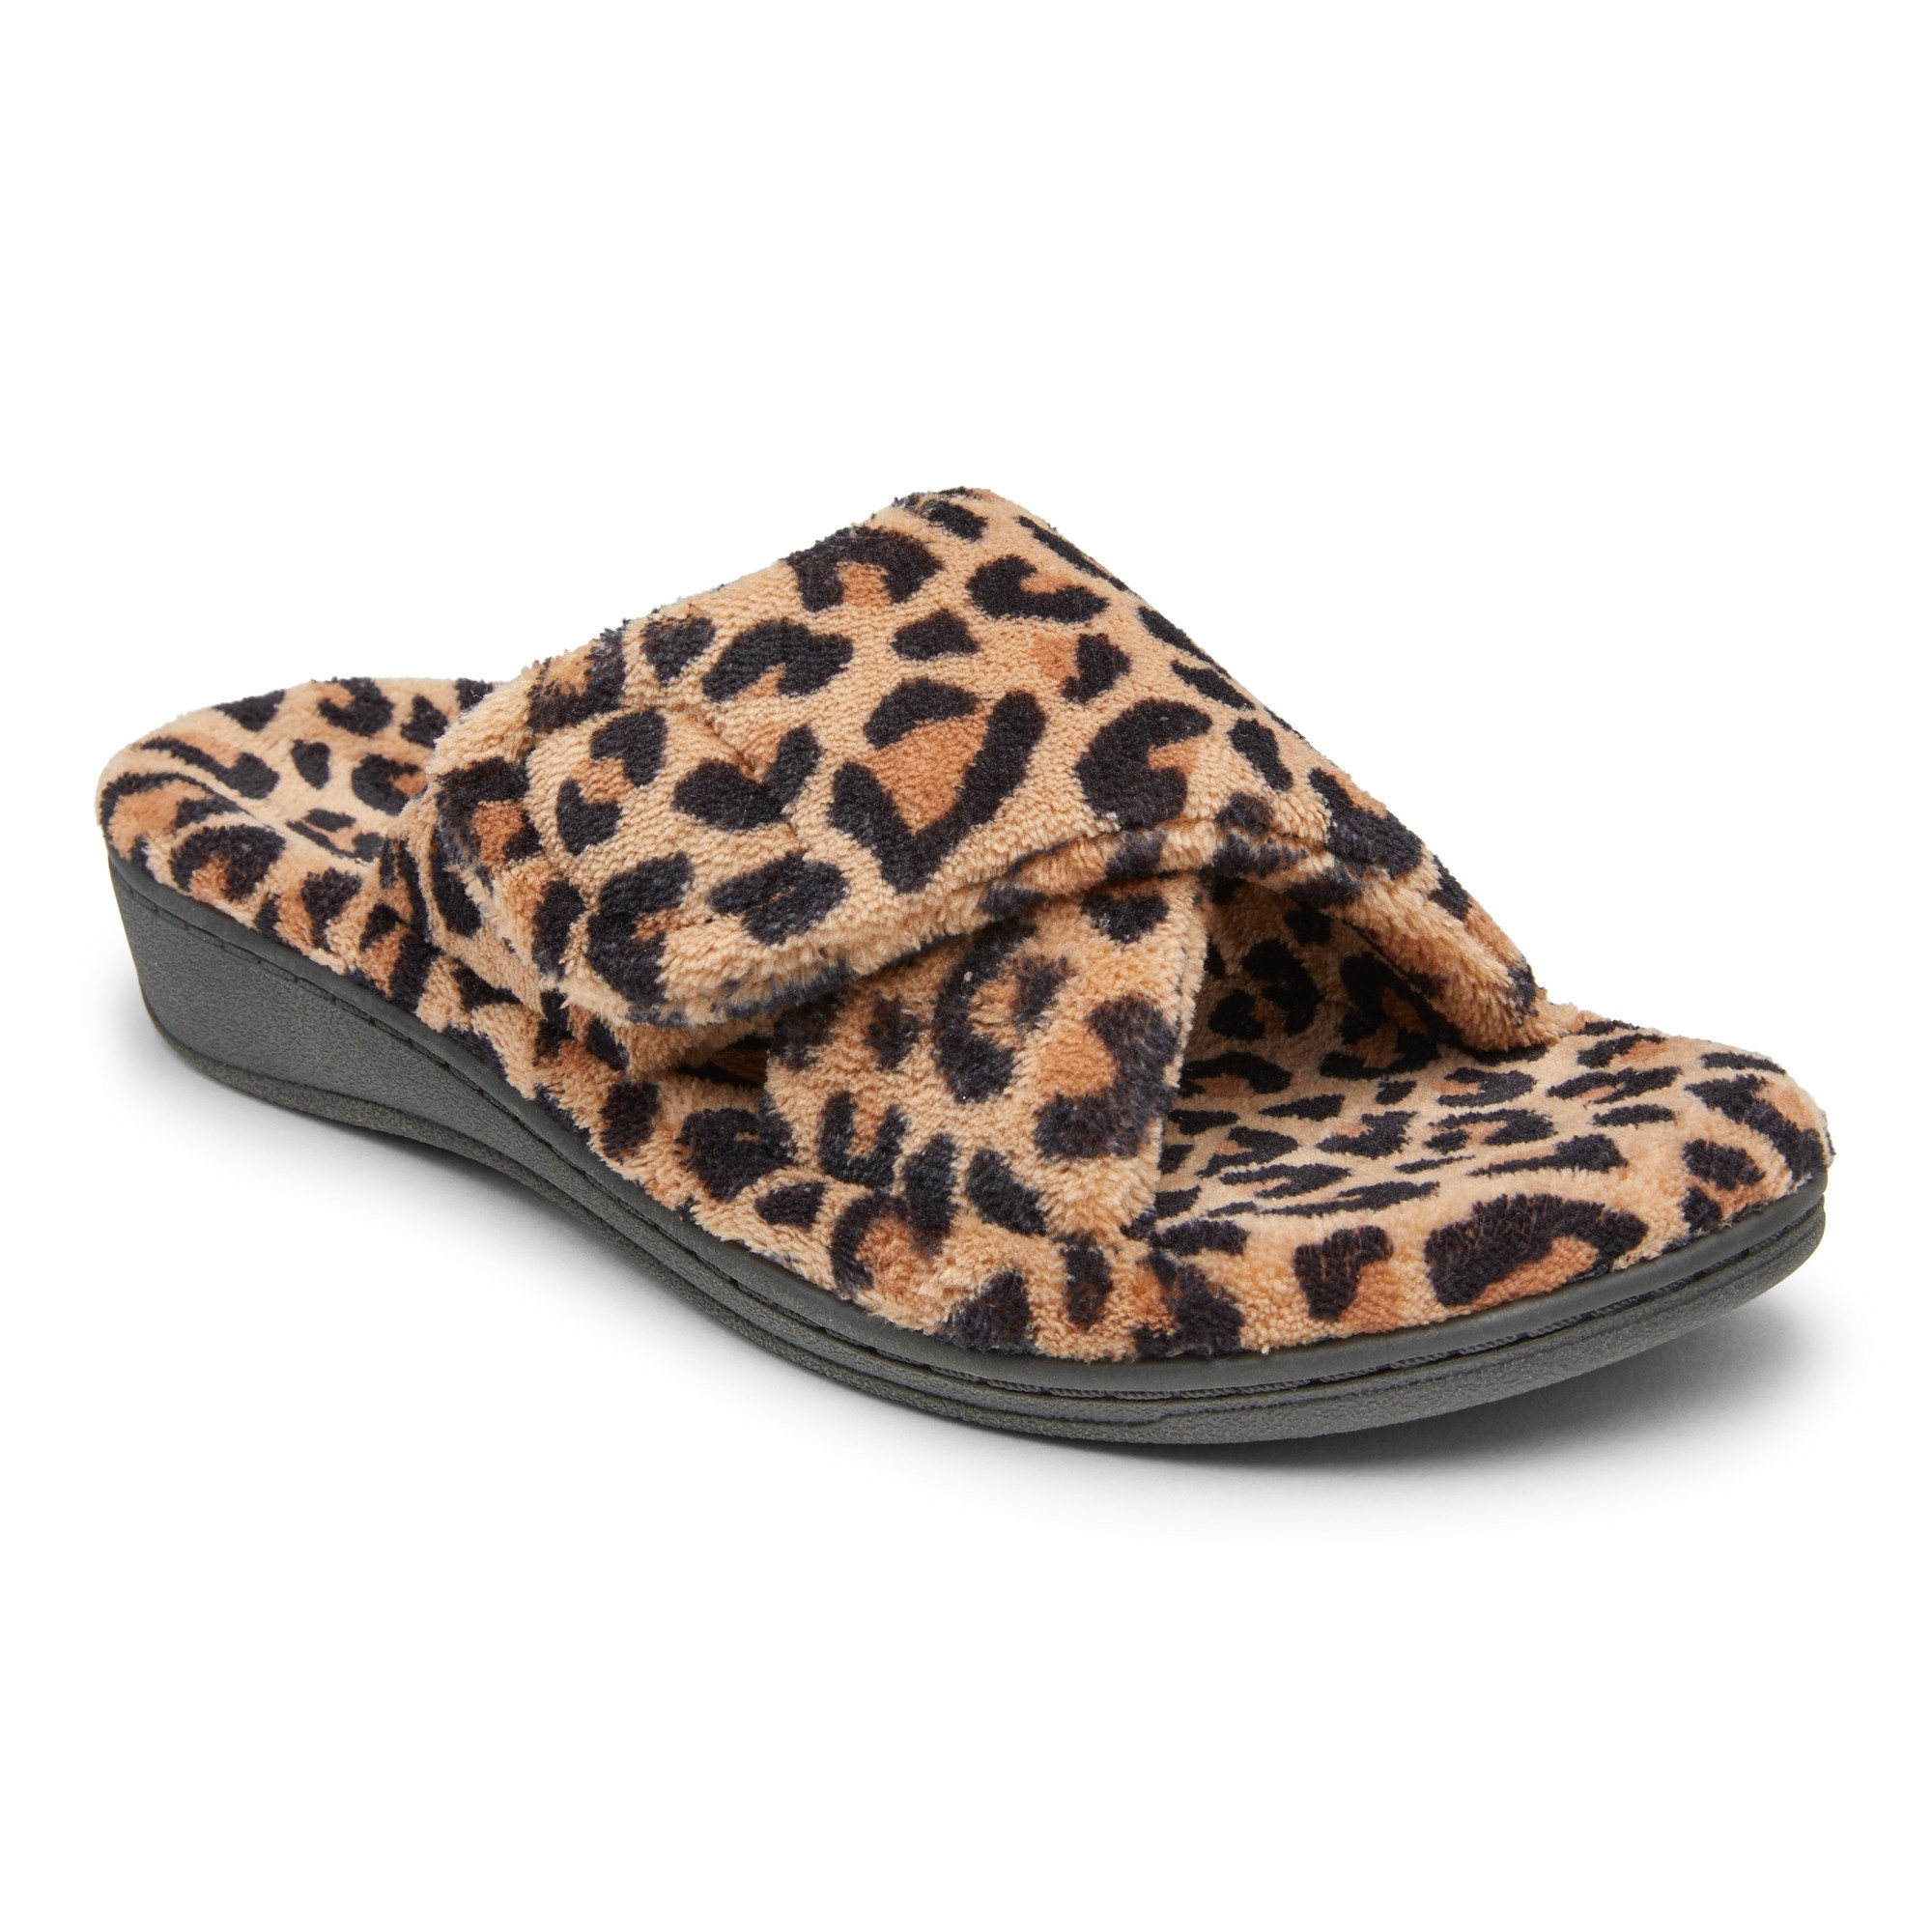 vionic slippers relax